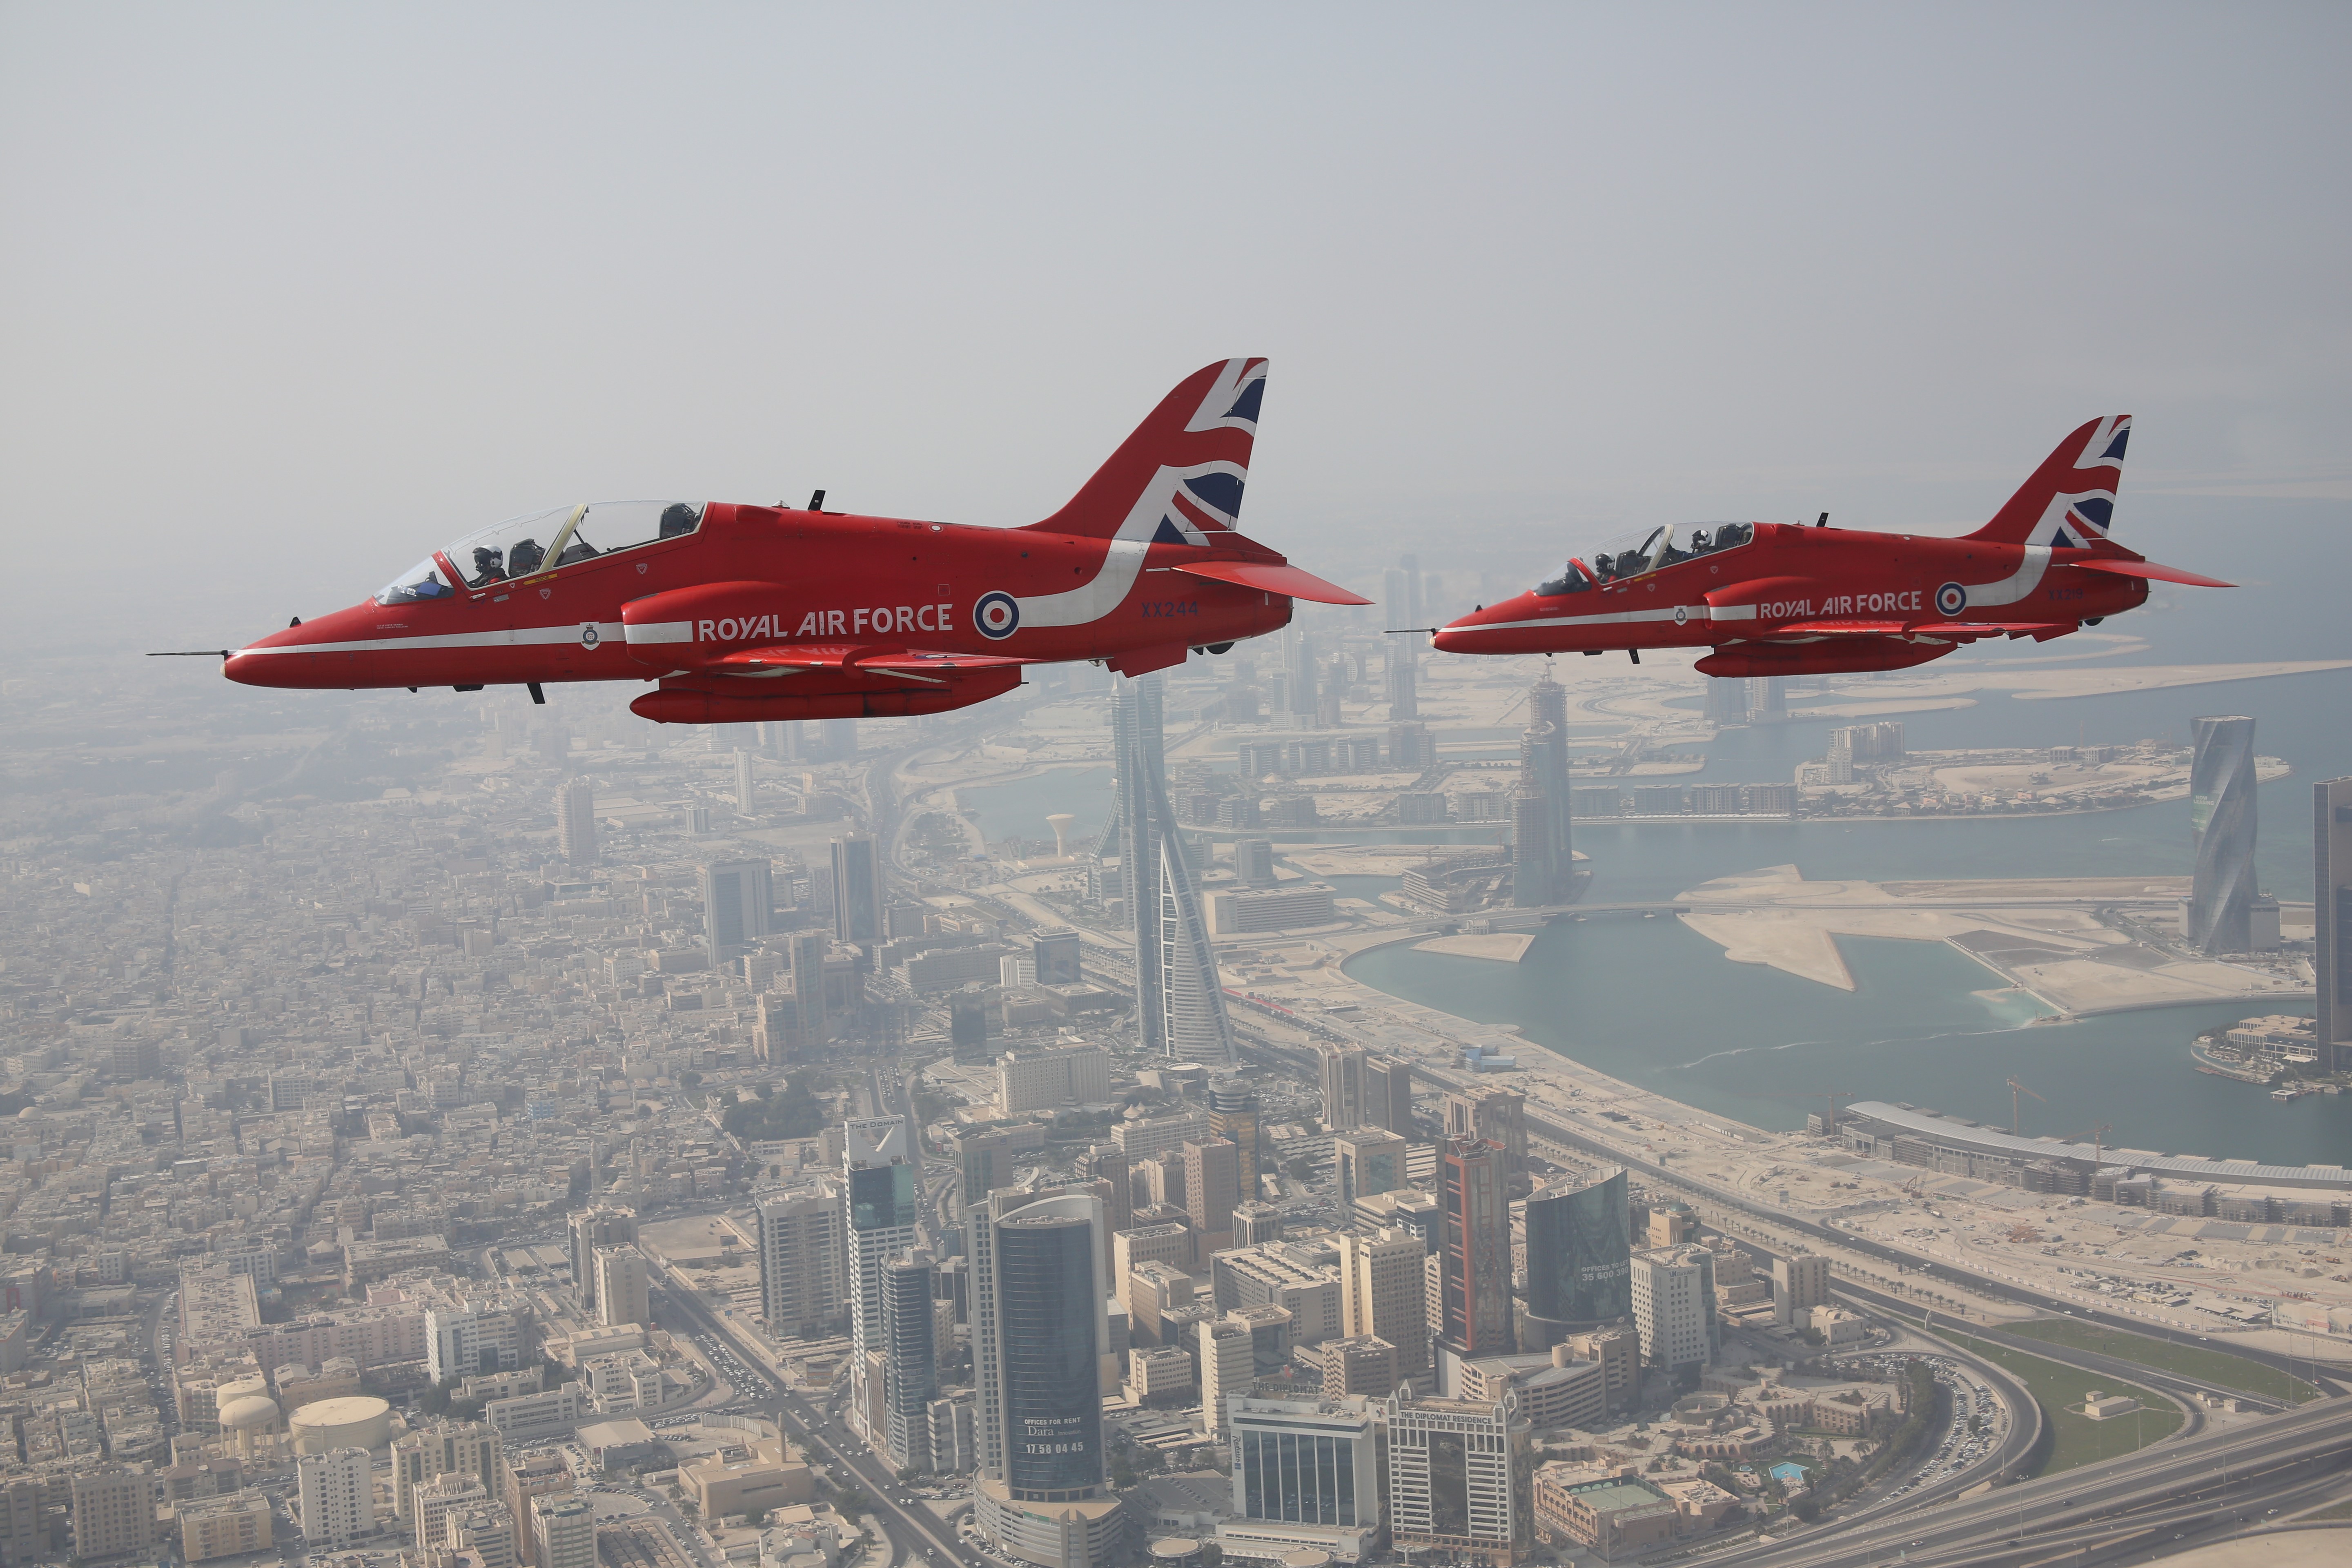 Image shows two Red Arrows in flight.